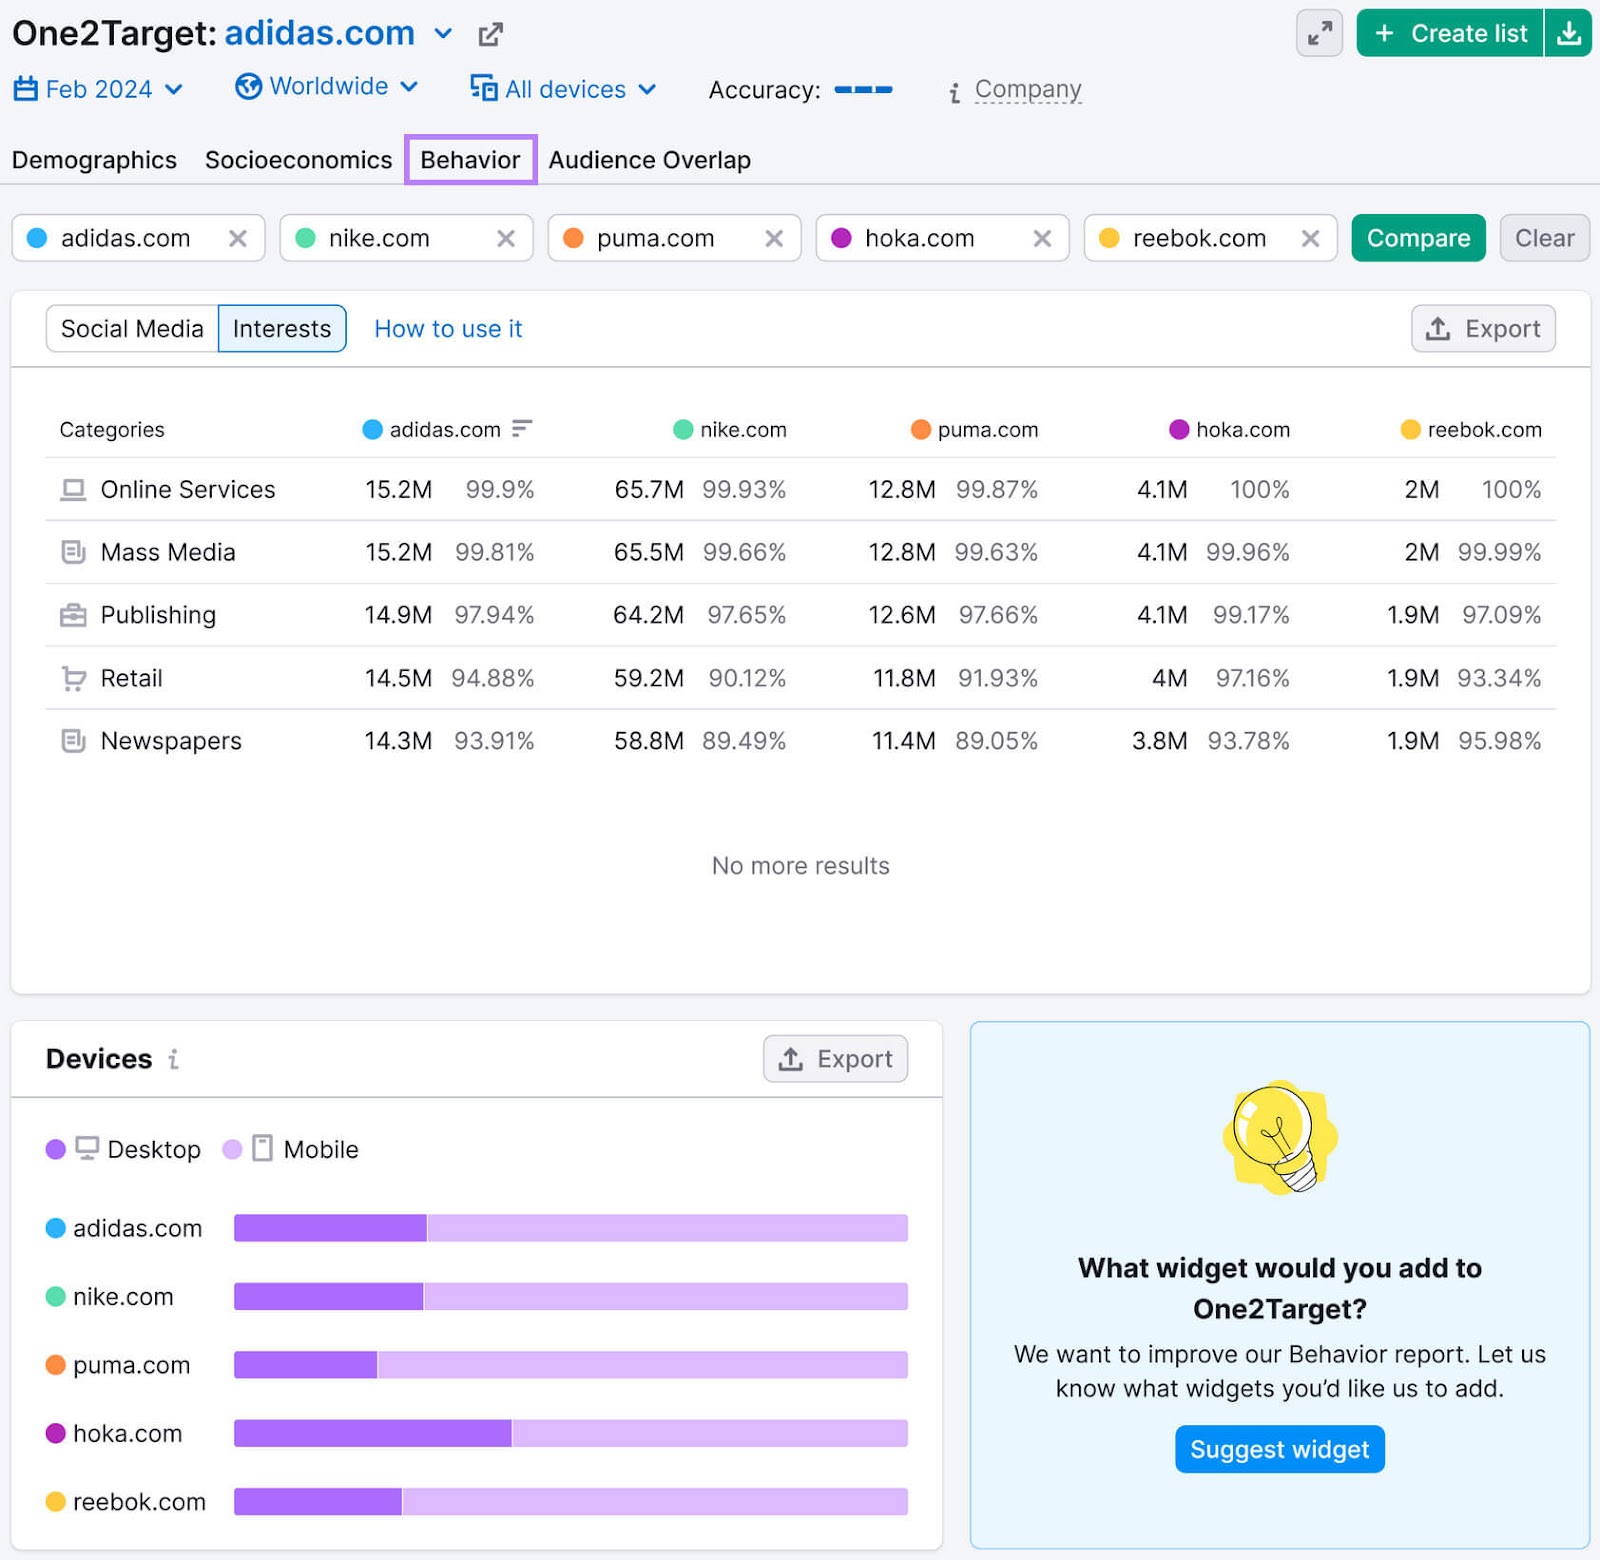 Behavior report in One2Target tool shows details about the audience's interests, most commonly used devices, and social media preferences